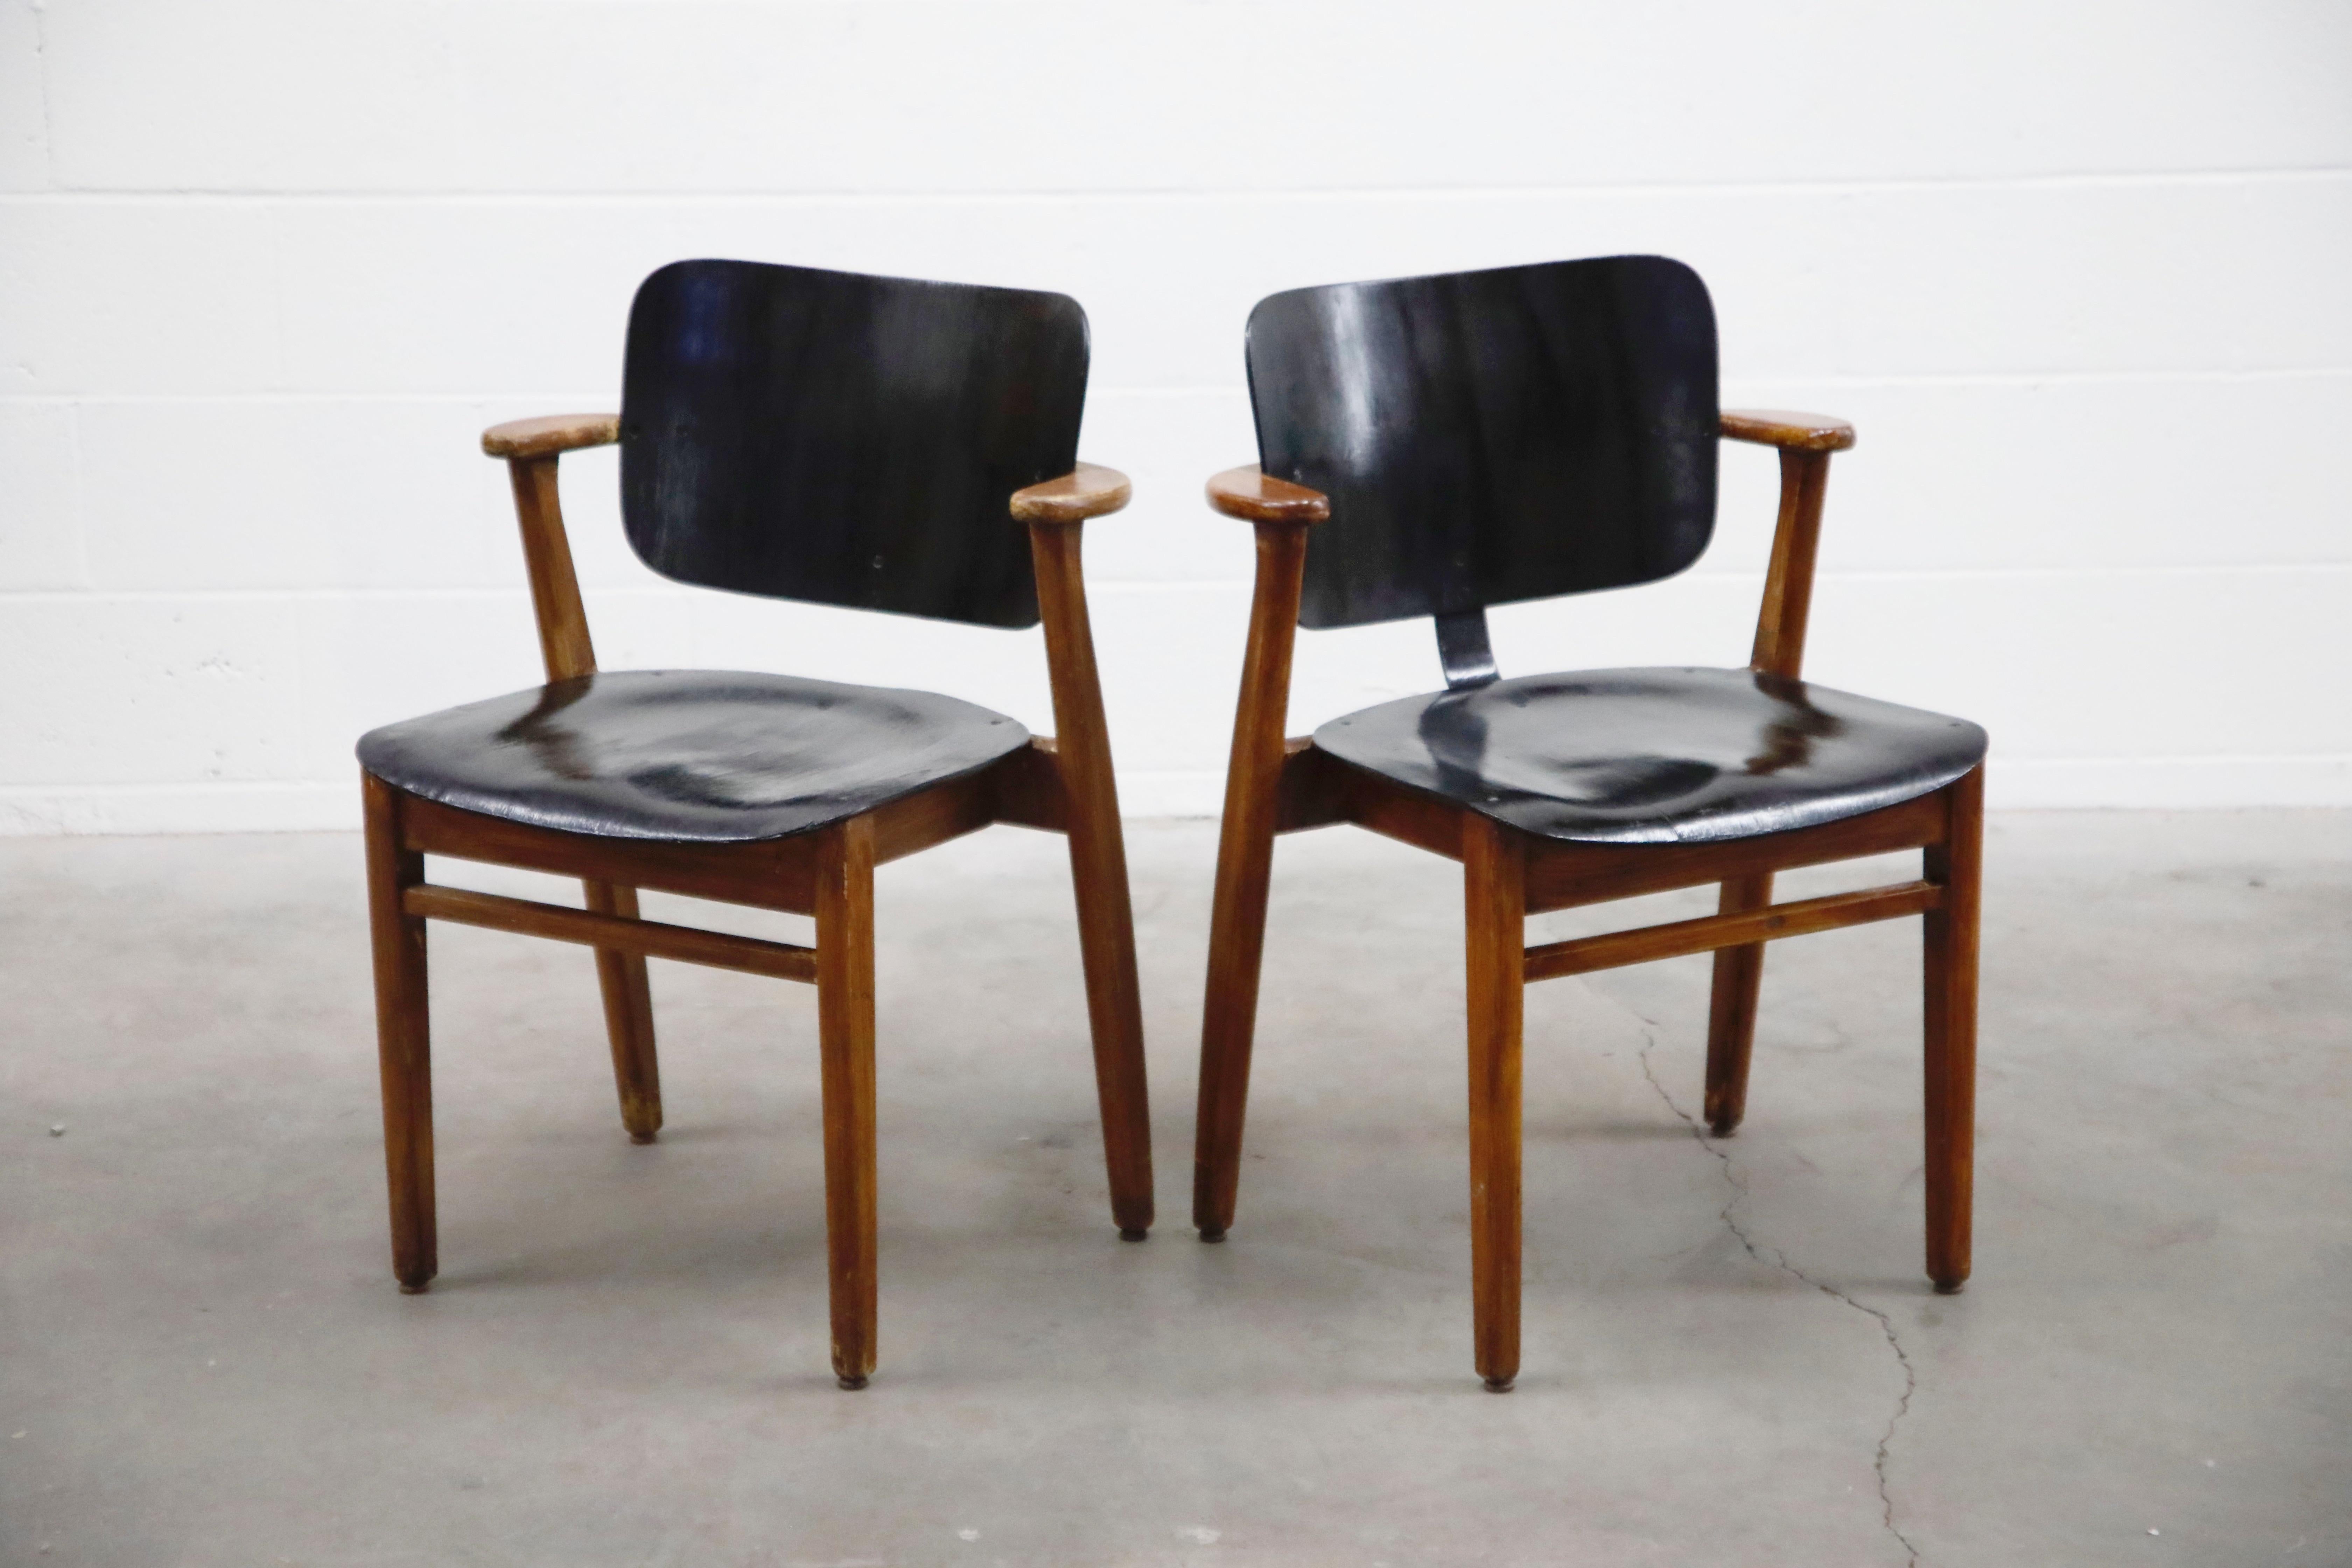 This incredible pair of Ilmari Tapiovaara 'Domus' armchairs (also called The Finn Chair in the US) was made in Finland, circa 1947, and very collectible and a fantastic example of early Mid-Century Modern design. Tapiovaara created this design for